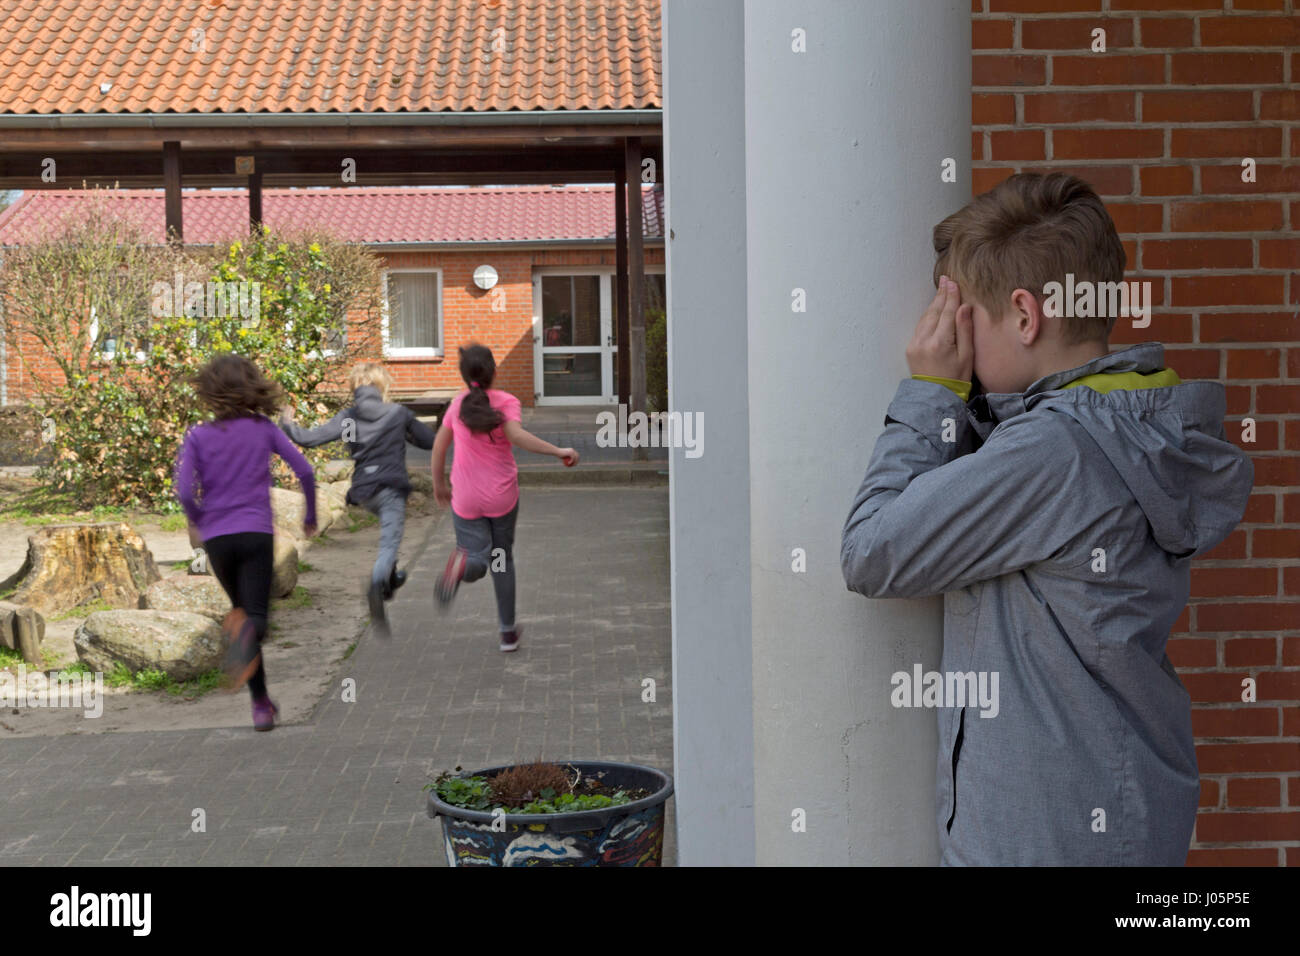 pupils at primary school playing hide and seek during break, Lower Saxony, Germany Stock Photo